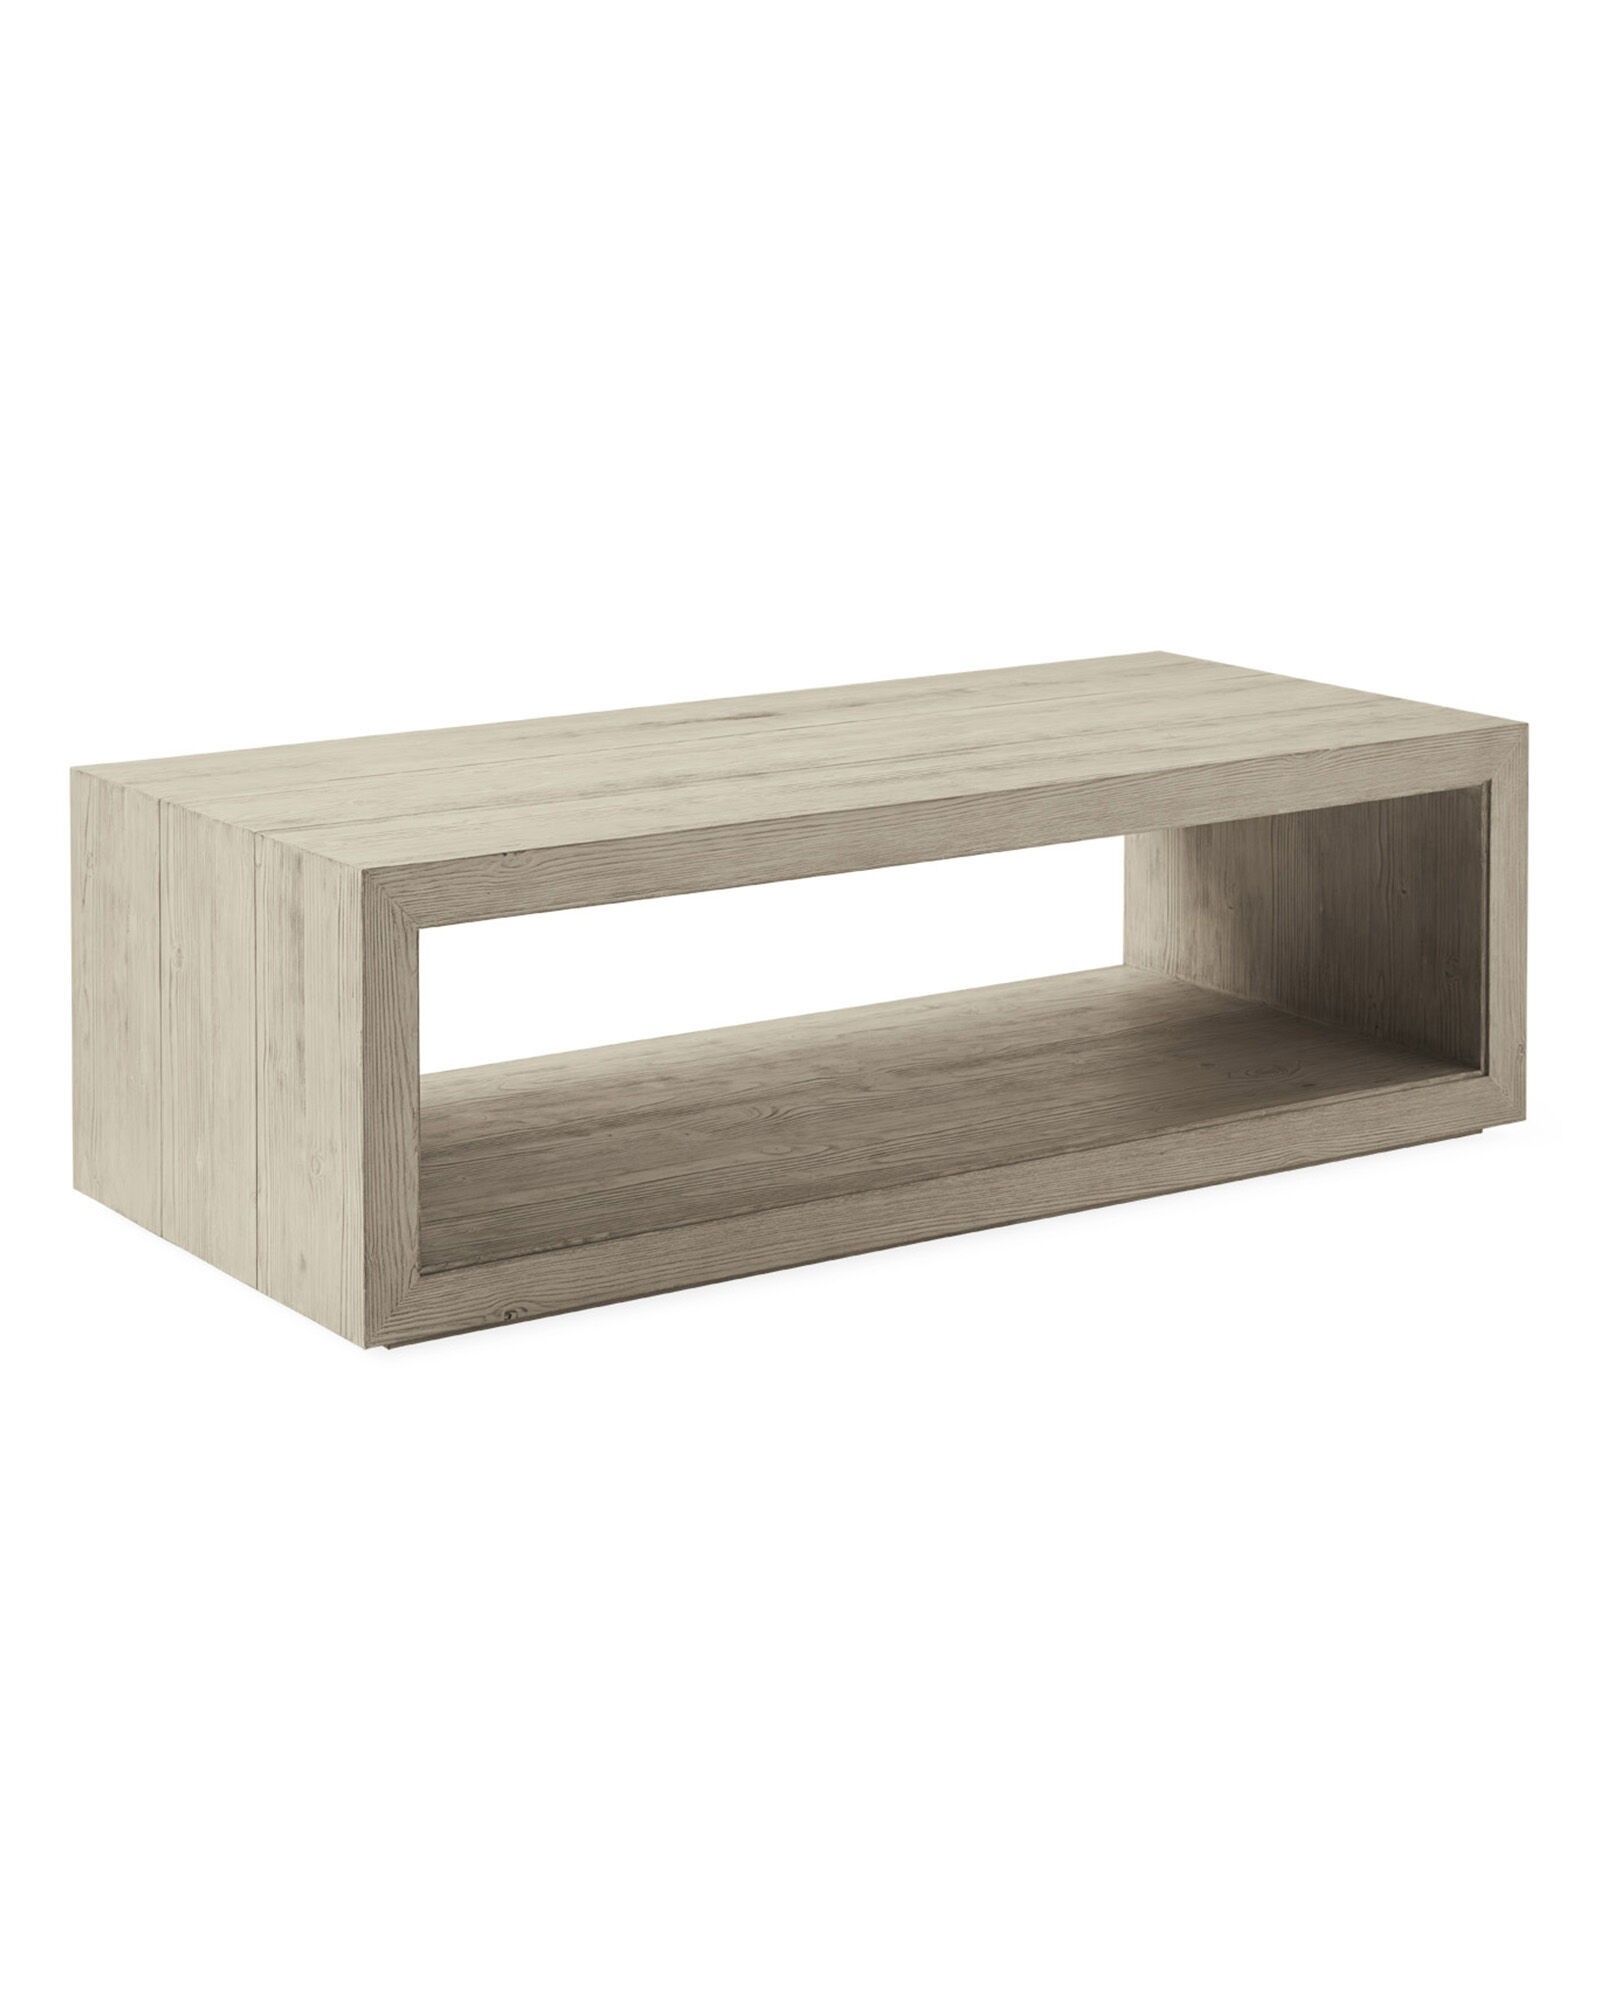 Atelier Rectangular Coffee Table | Serena and Lily